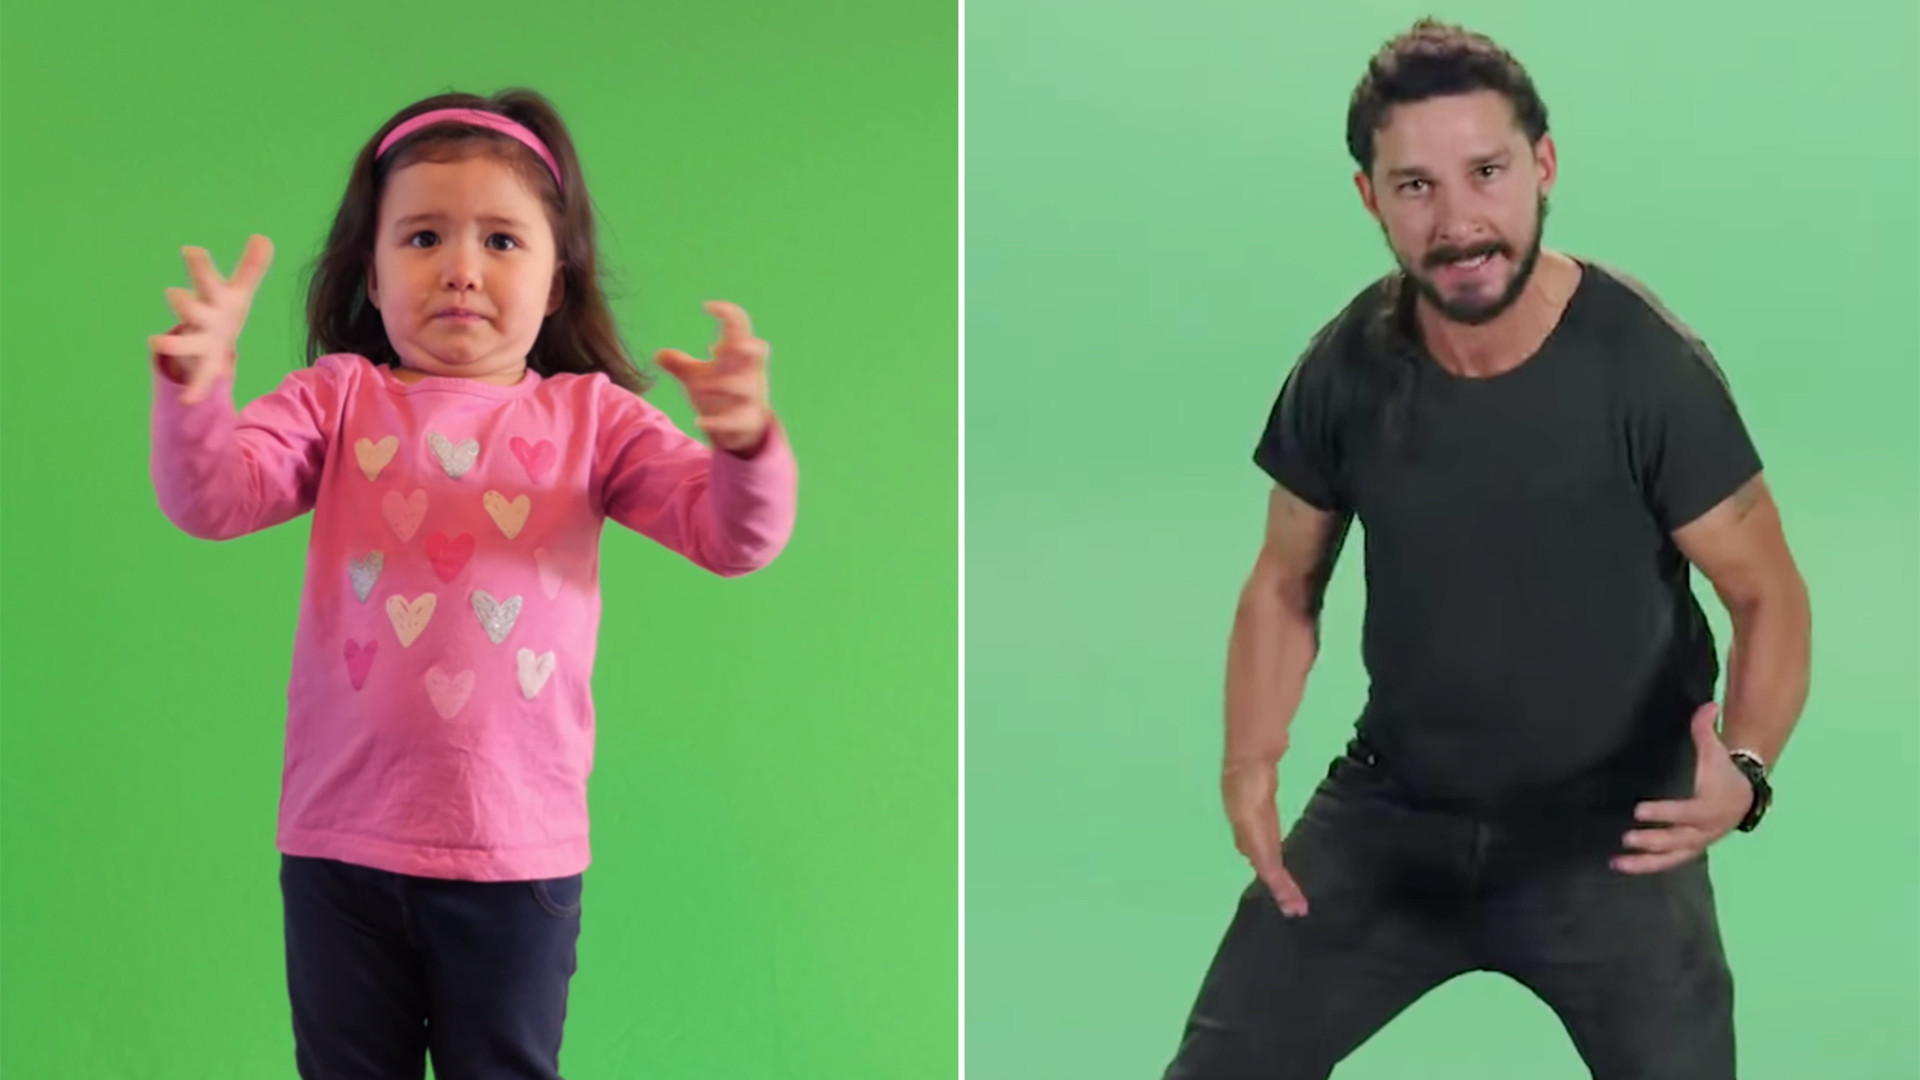 1920x1080 3-year-old spoofs Shia LaBeouf's motivational 'Just do it' speech -  TODAY.com